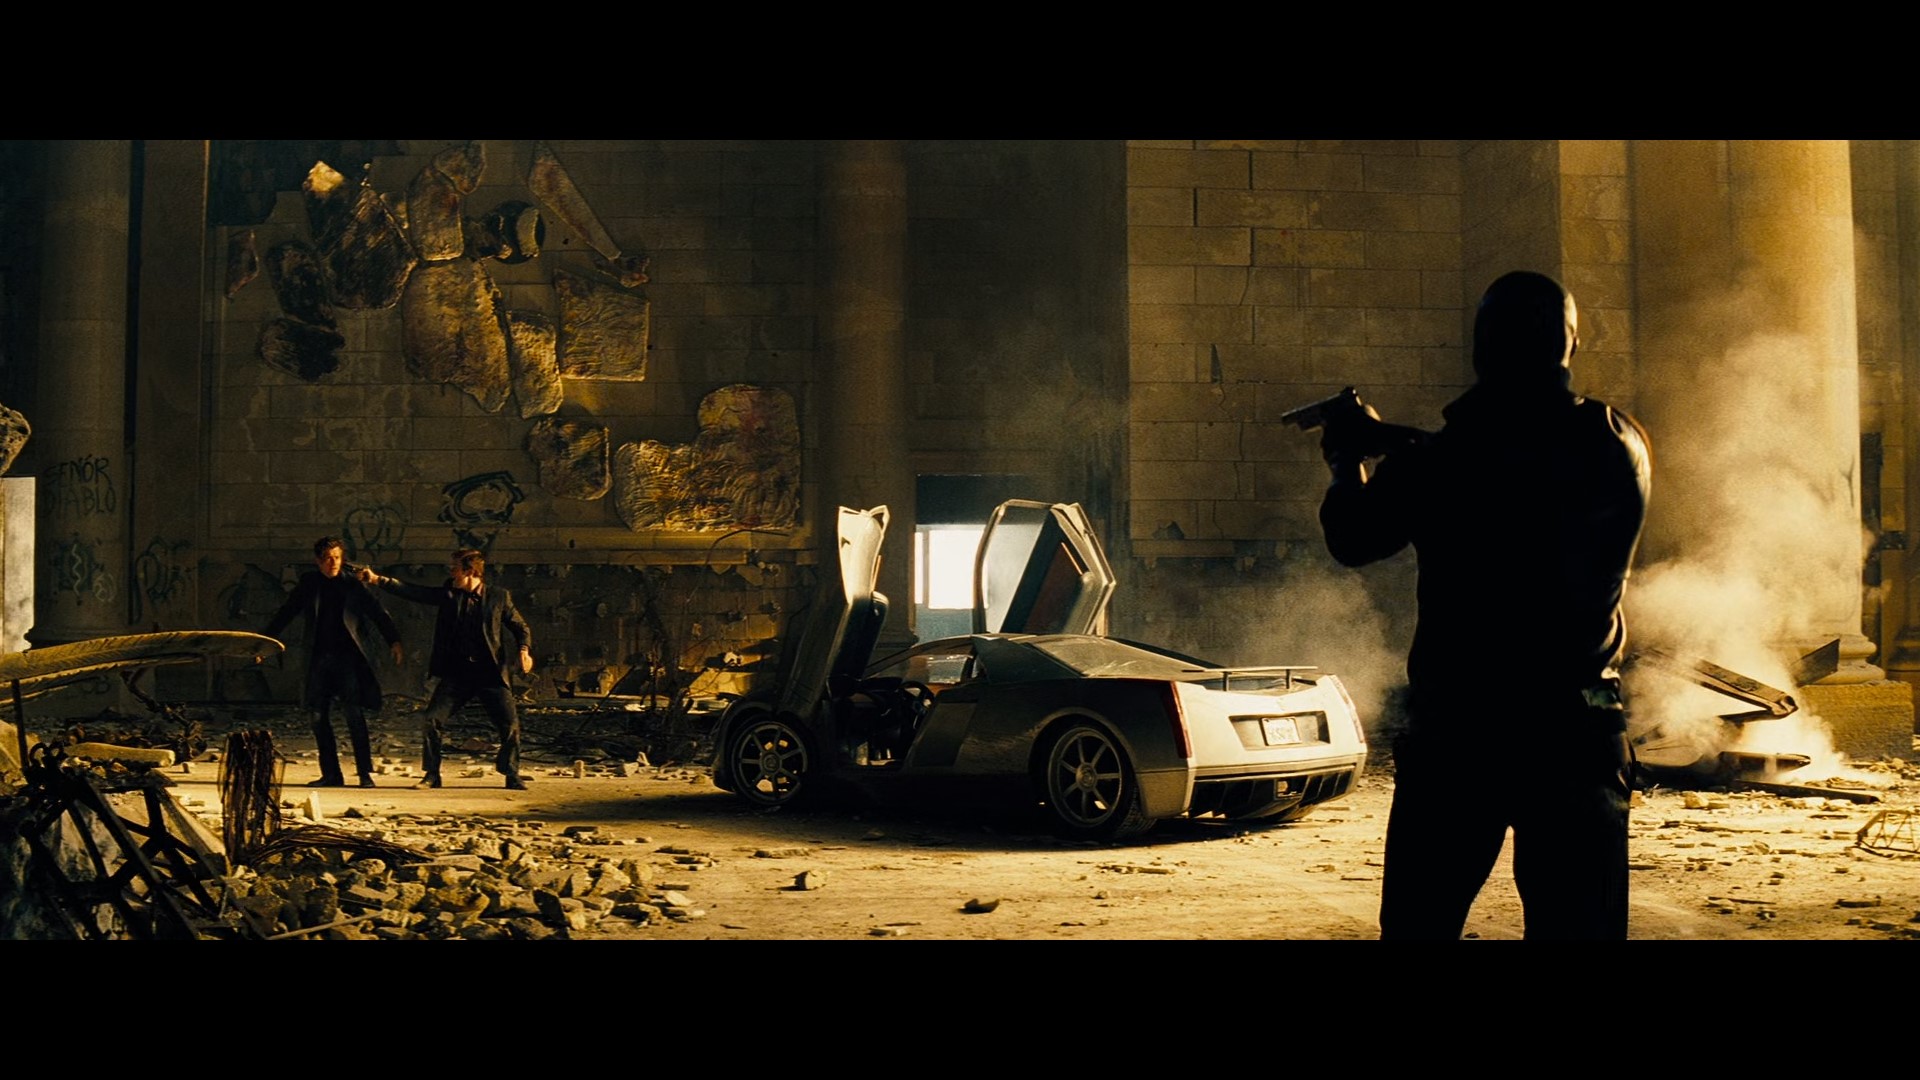 Lincoln 6 - Eko vs Tom Lincoln (The scene where they argue that they are real) (Source - Movie Ireland)